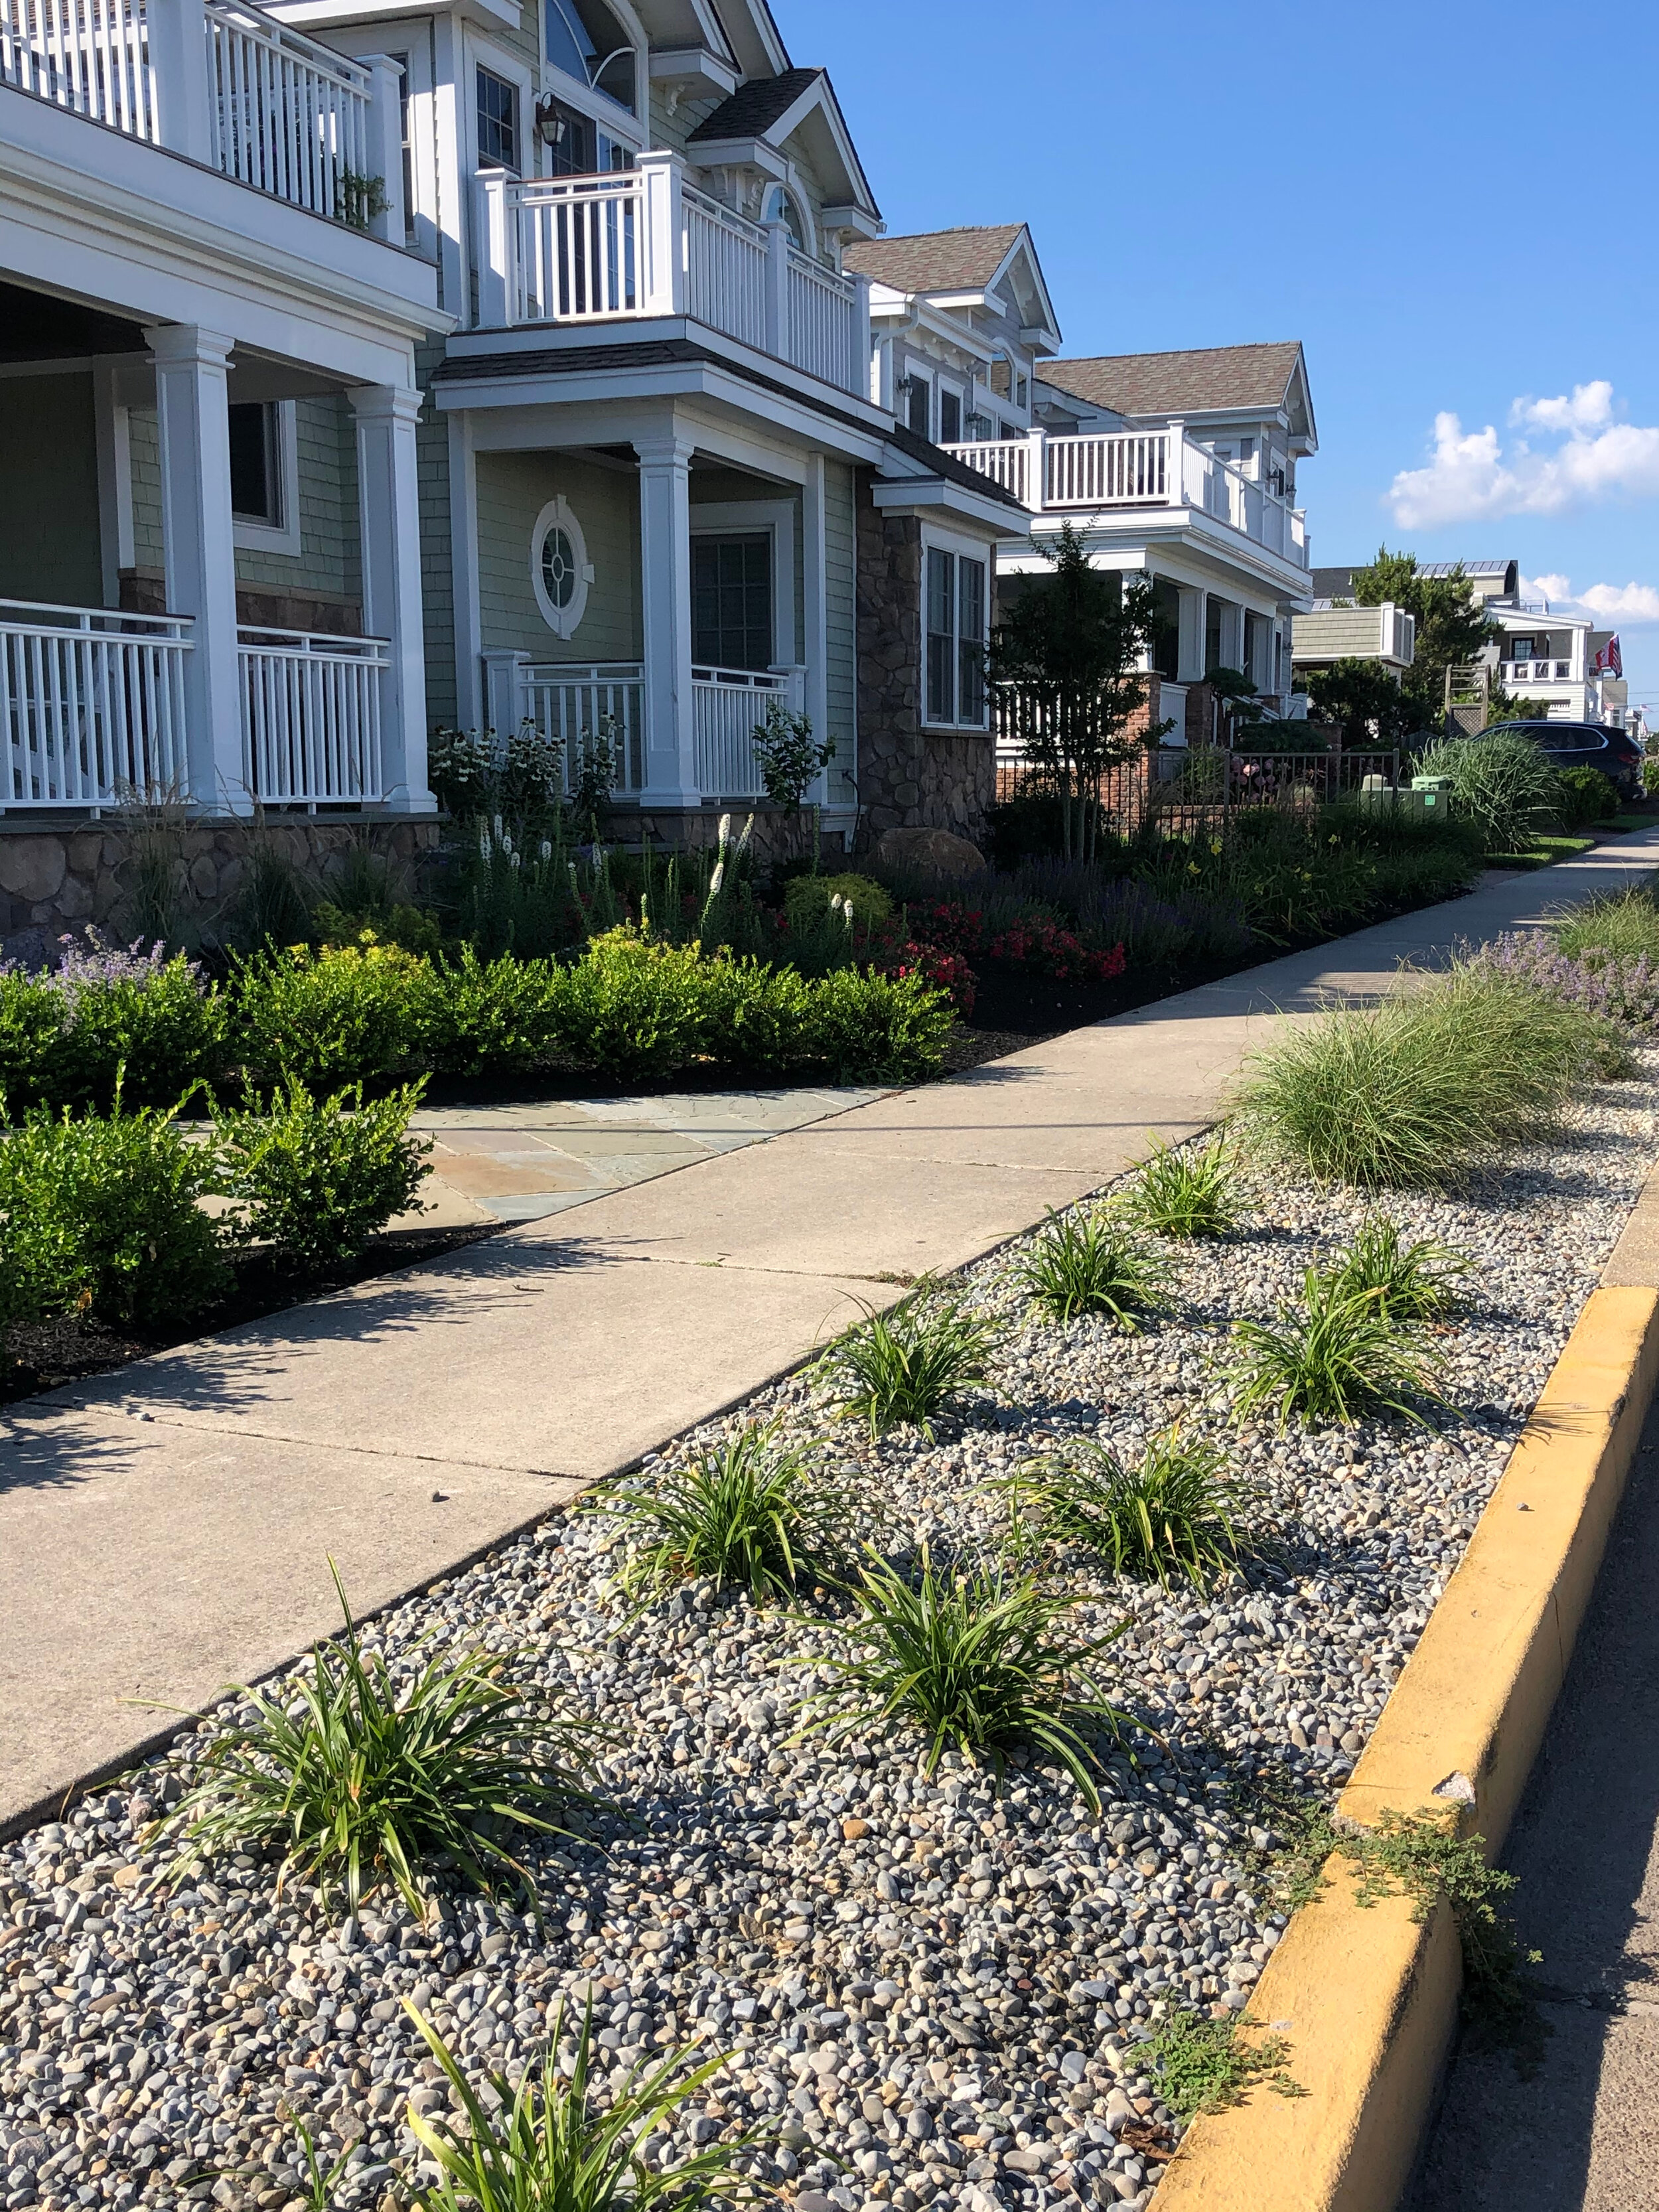 Replacing curbside turf with stones reduces runoff.